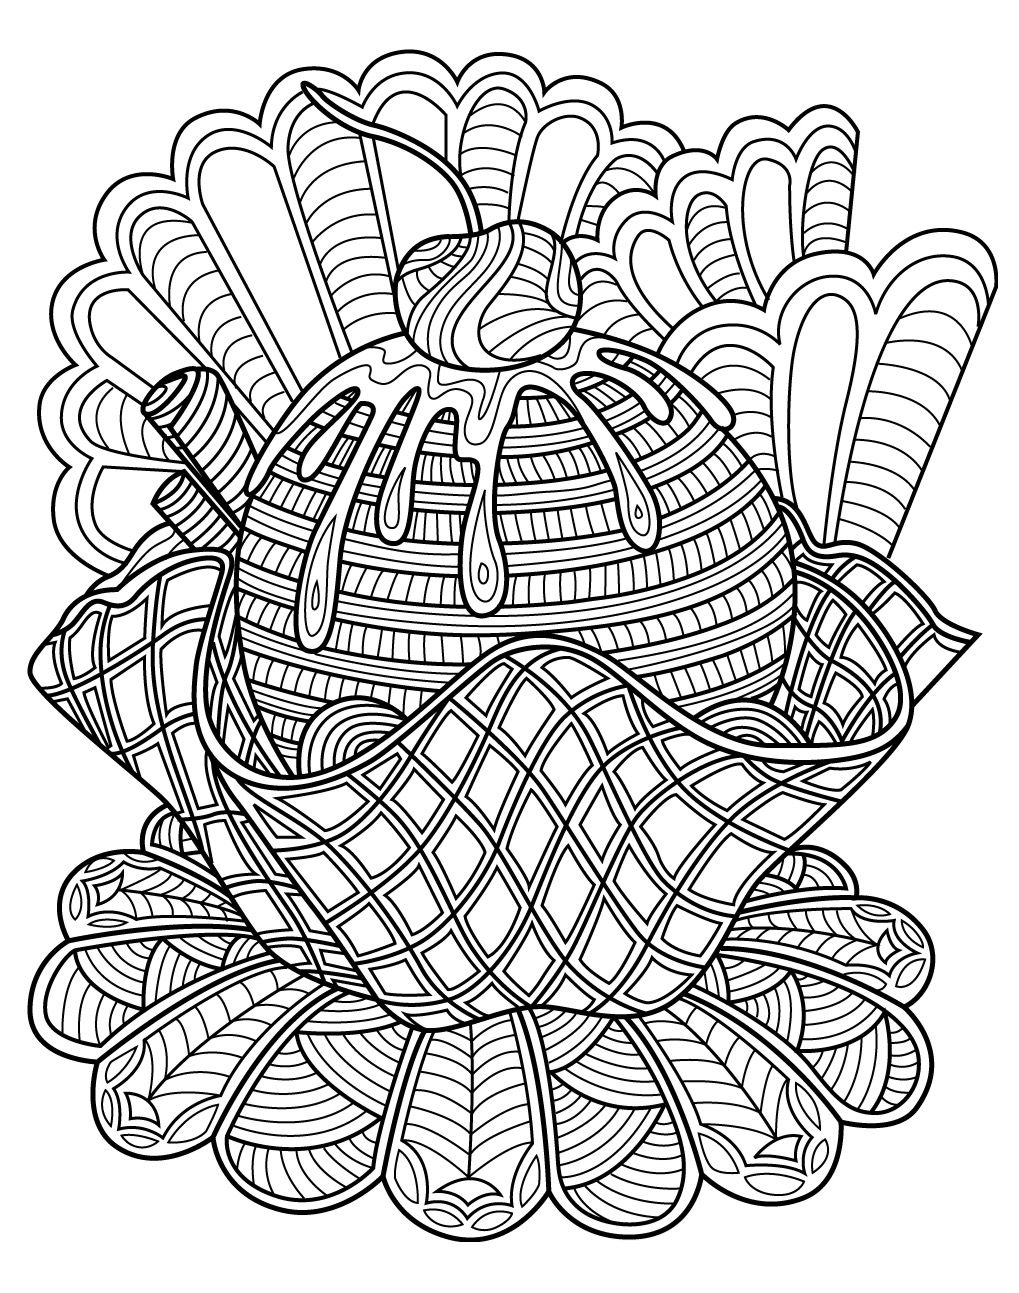 Sweets Coloring Page   Colorish Free Coloring App For ...